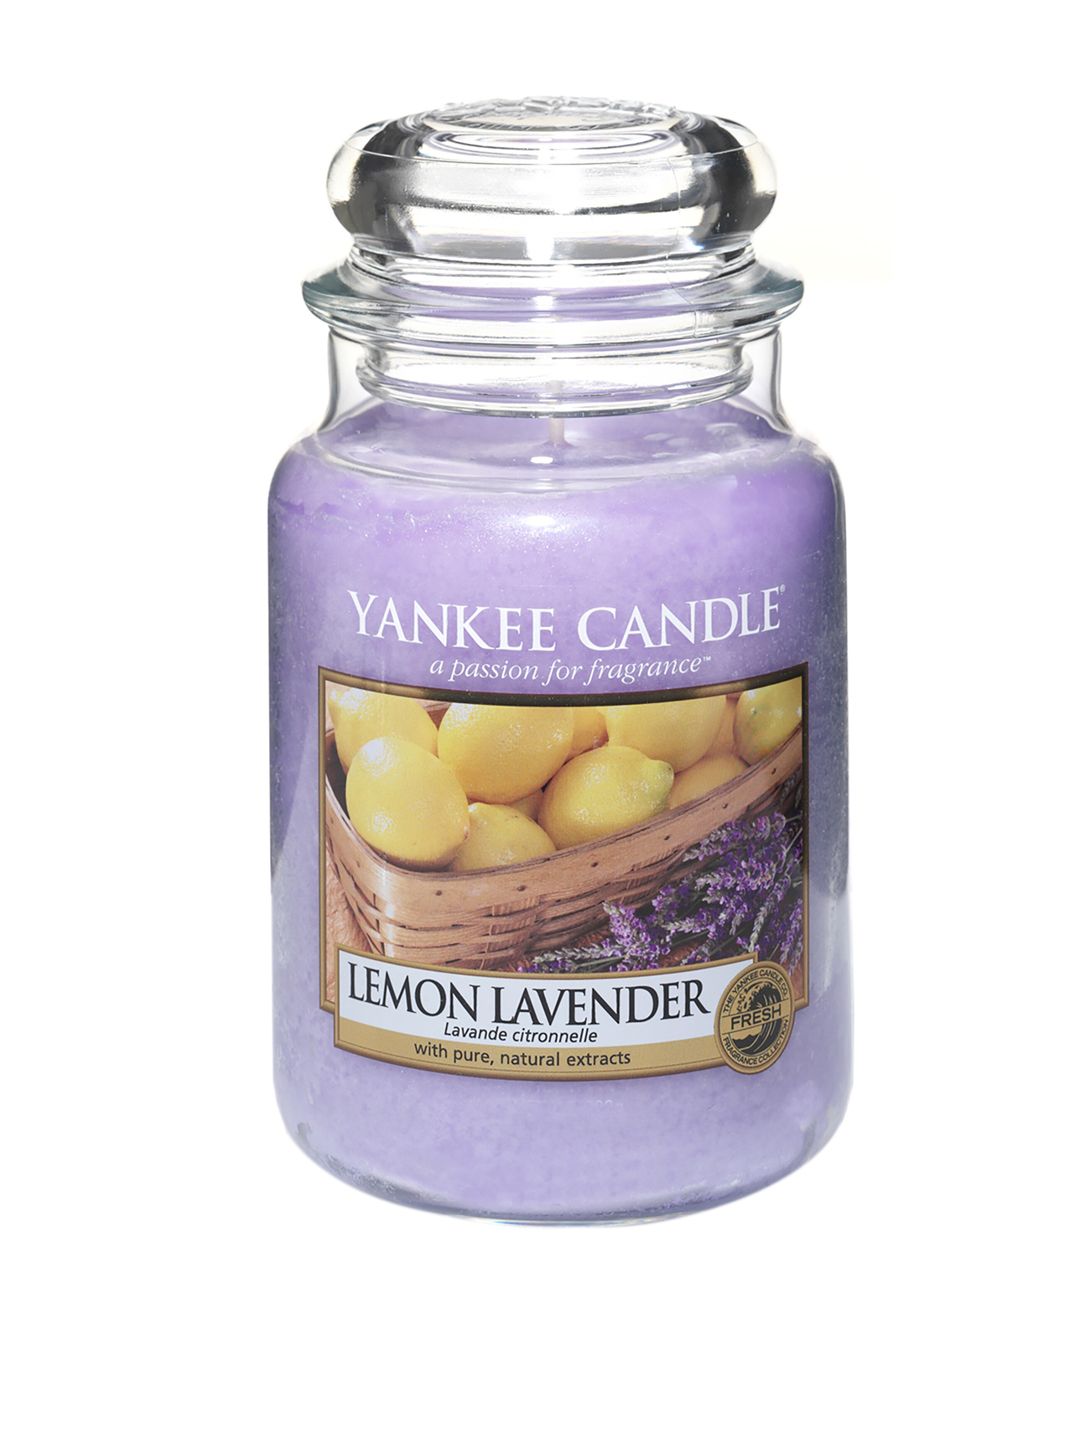 YANKEE CANDLE Lavender Classic Large Jar Lemon Lavender Scented Candles Price in India